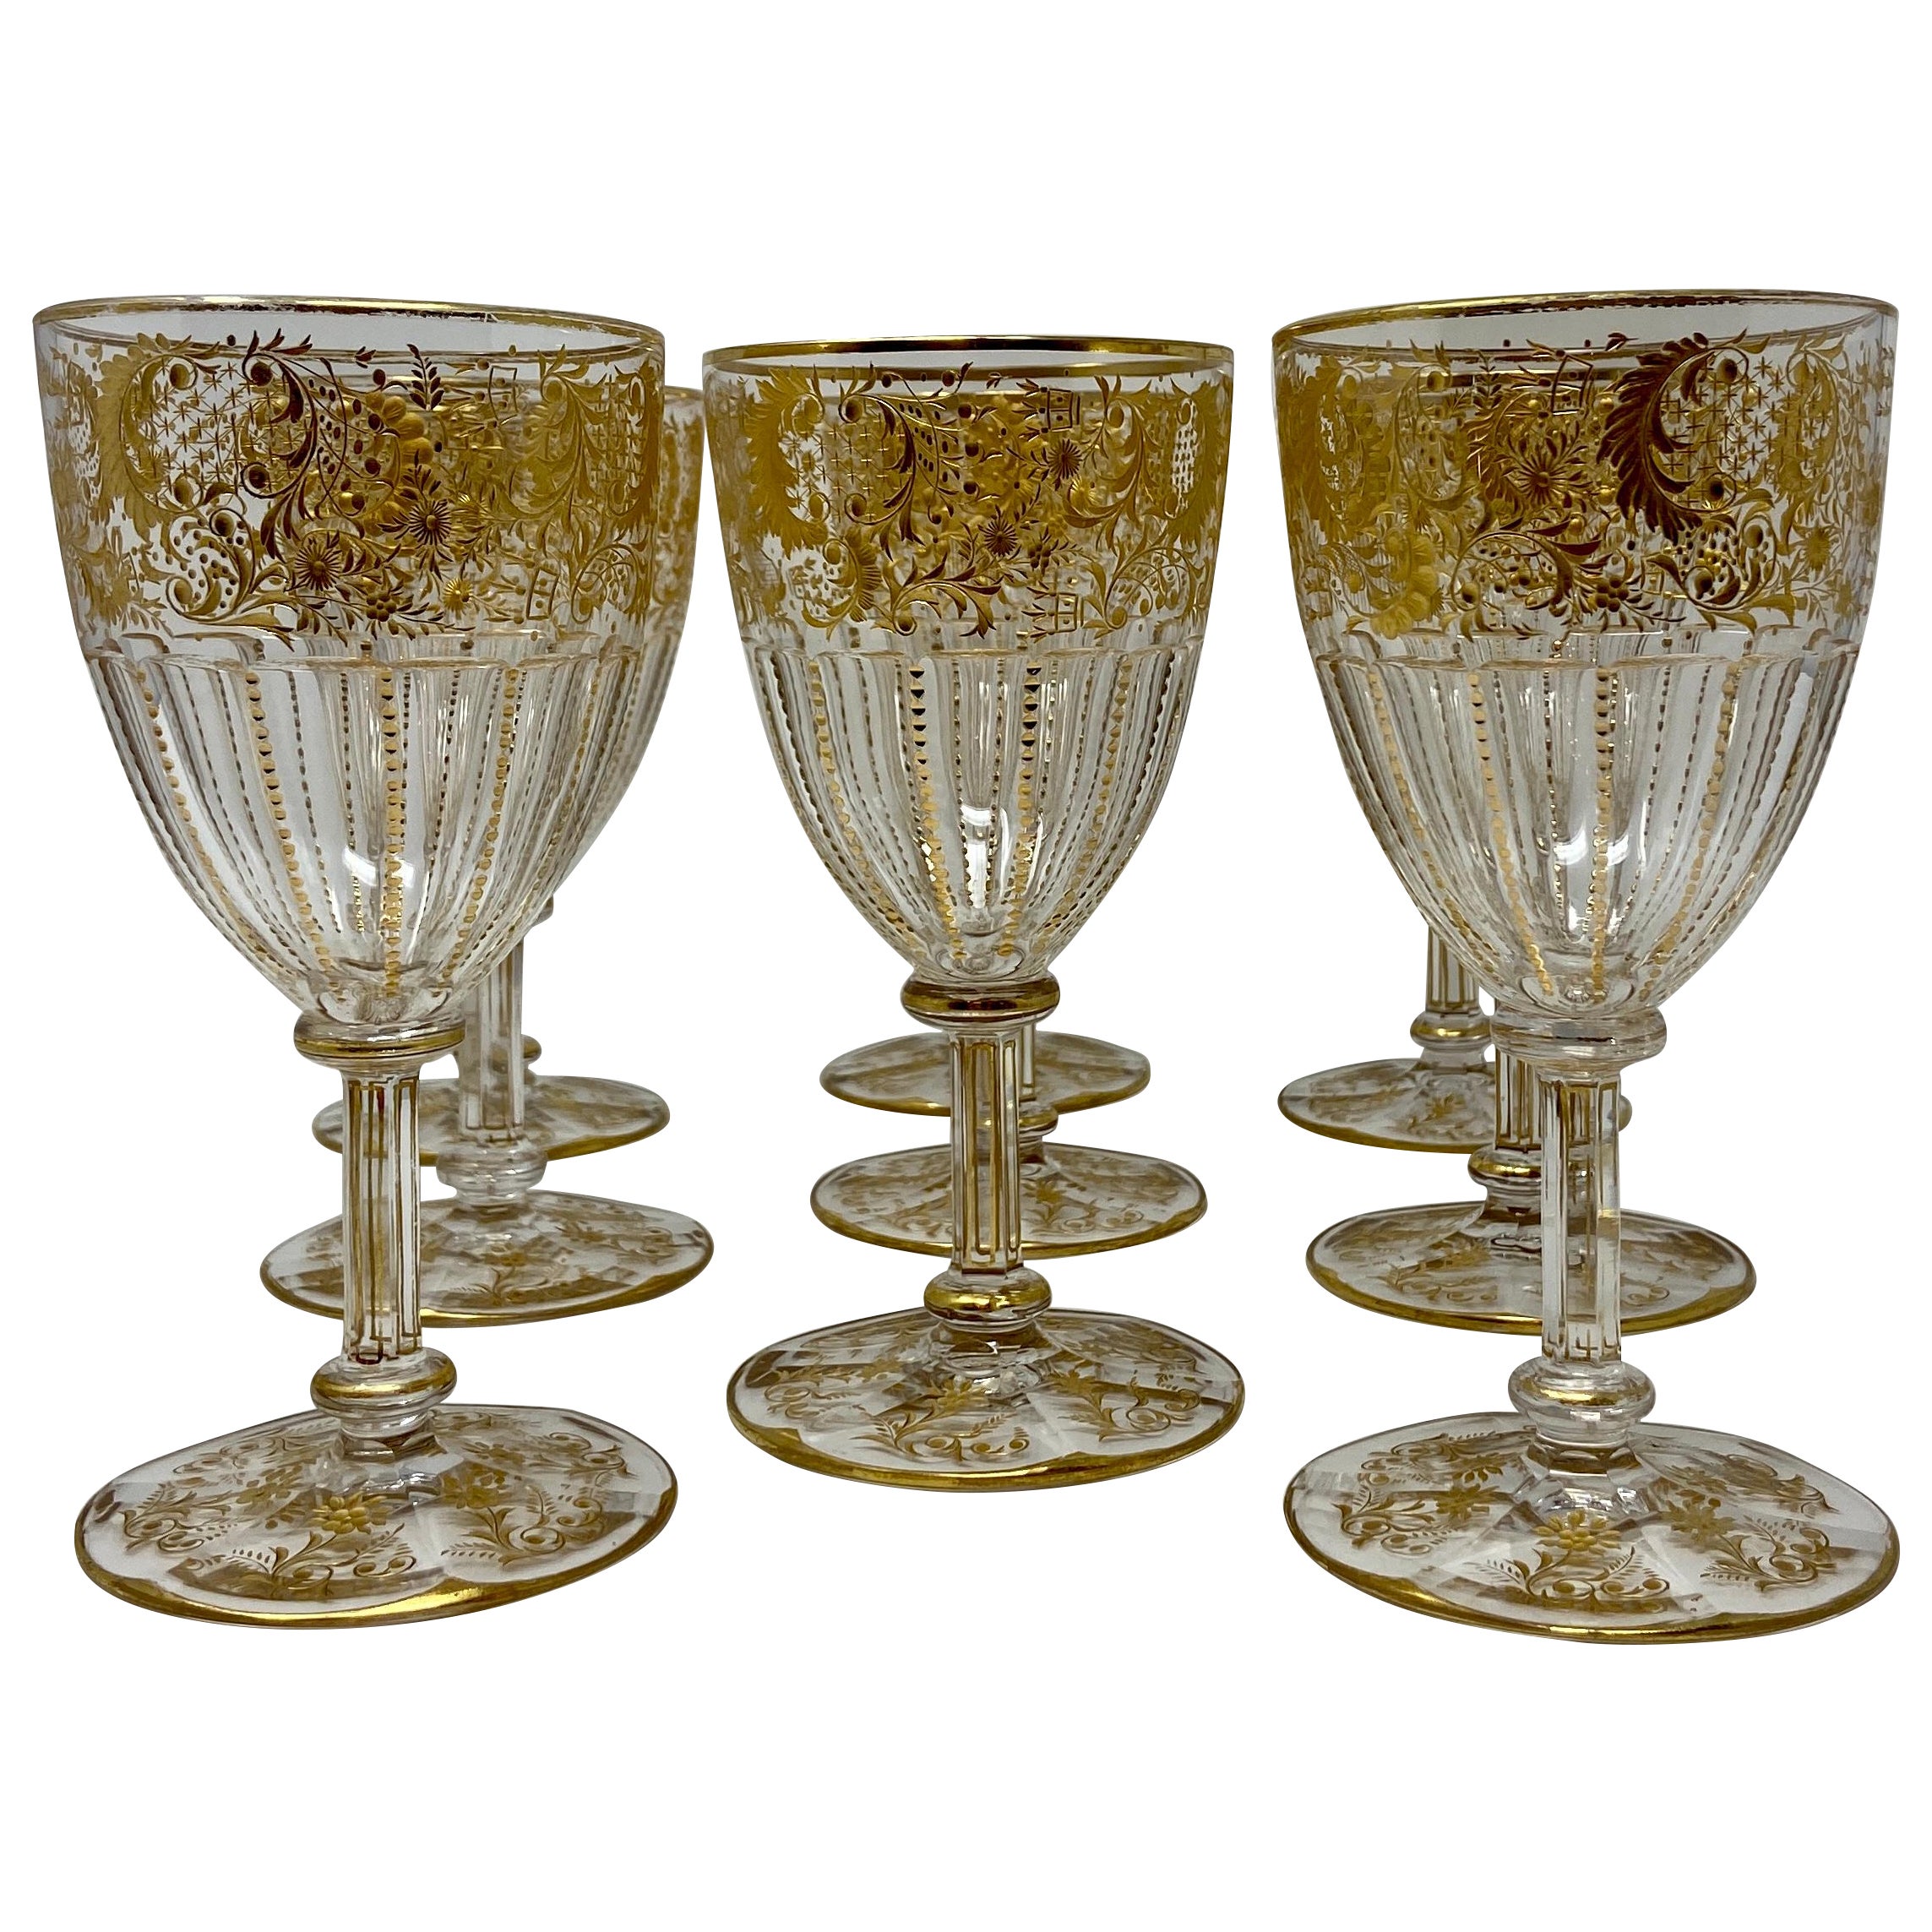 Set of 9 Antique French Val Saint Lambert Gold-Etched Crystal Goblets, Ca. 1890s